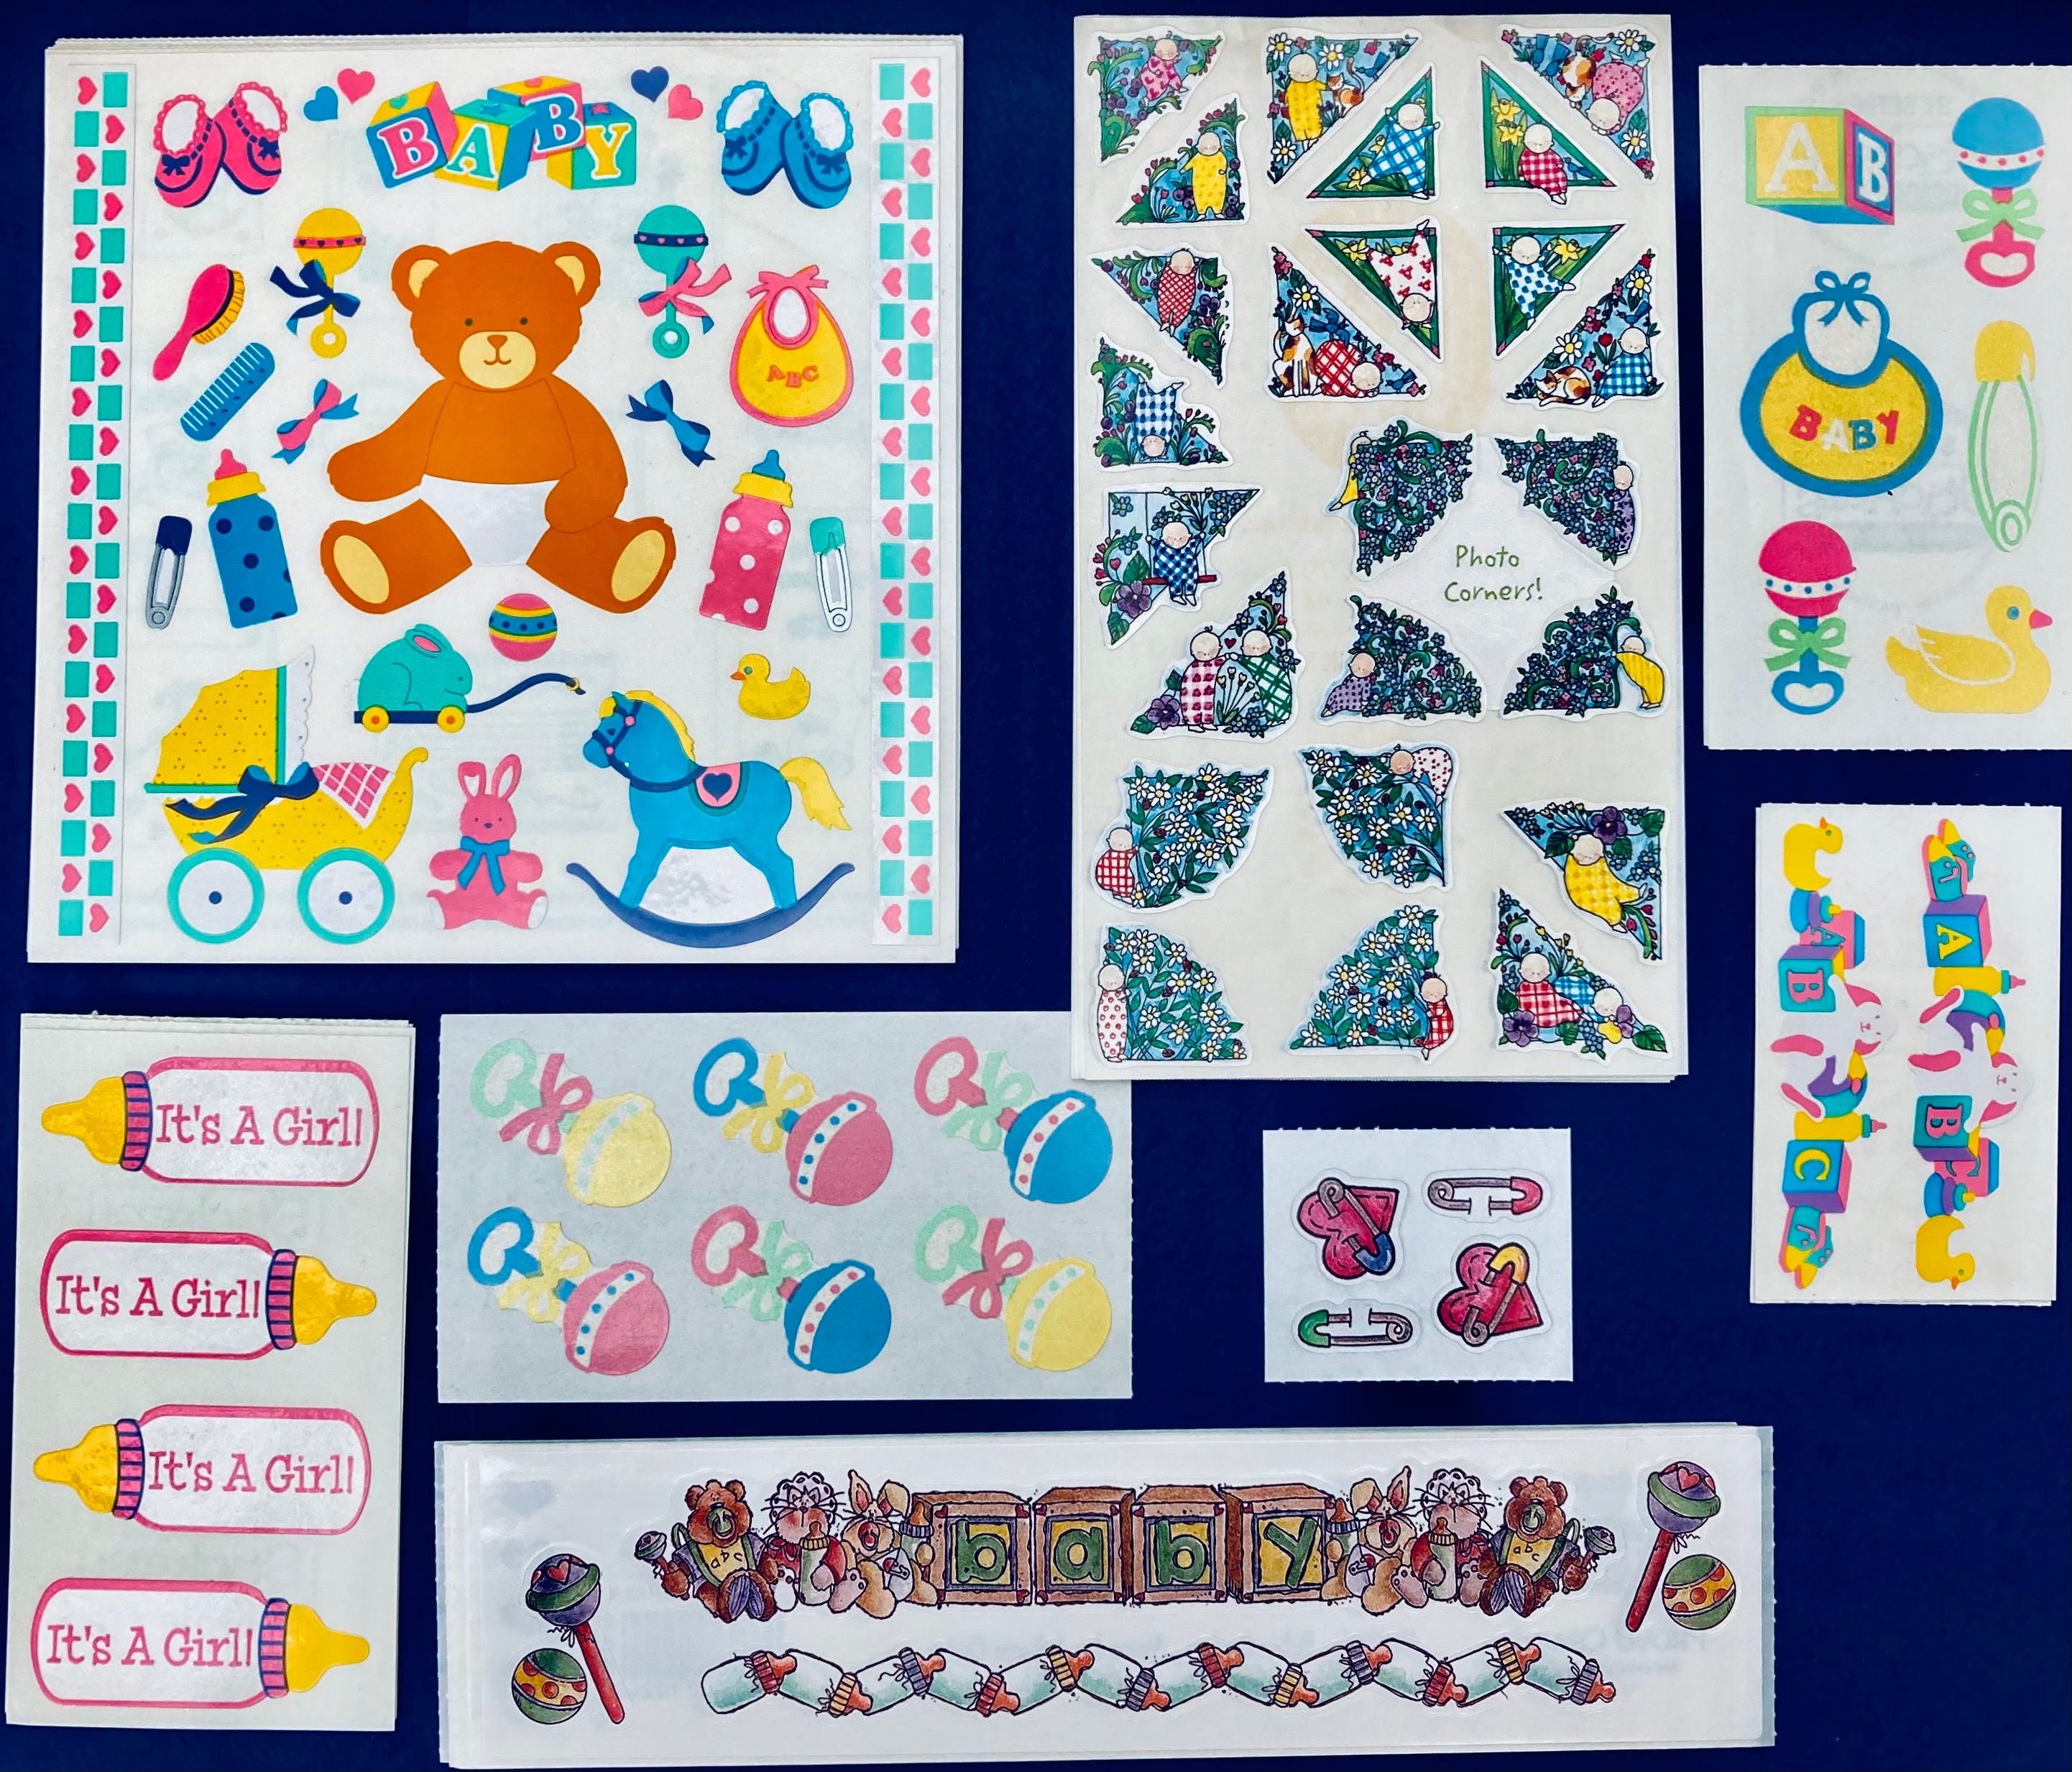 KIT COMPLET UTILITAIRE ·.¸¸ FRANCE STICKERS ¸¸.·